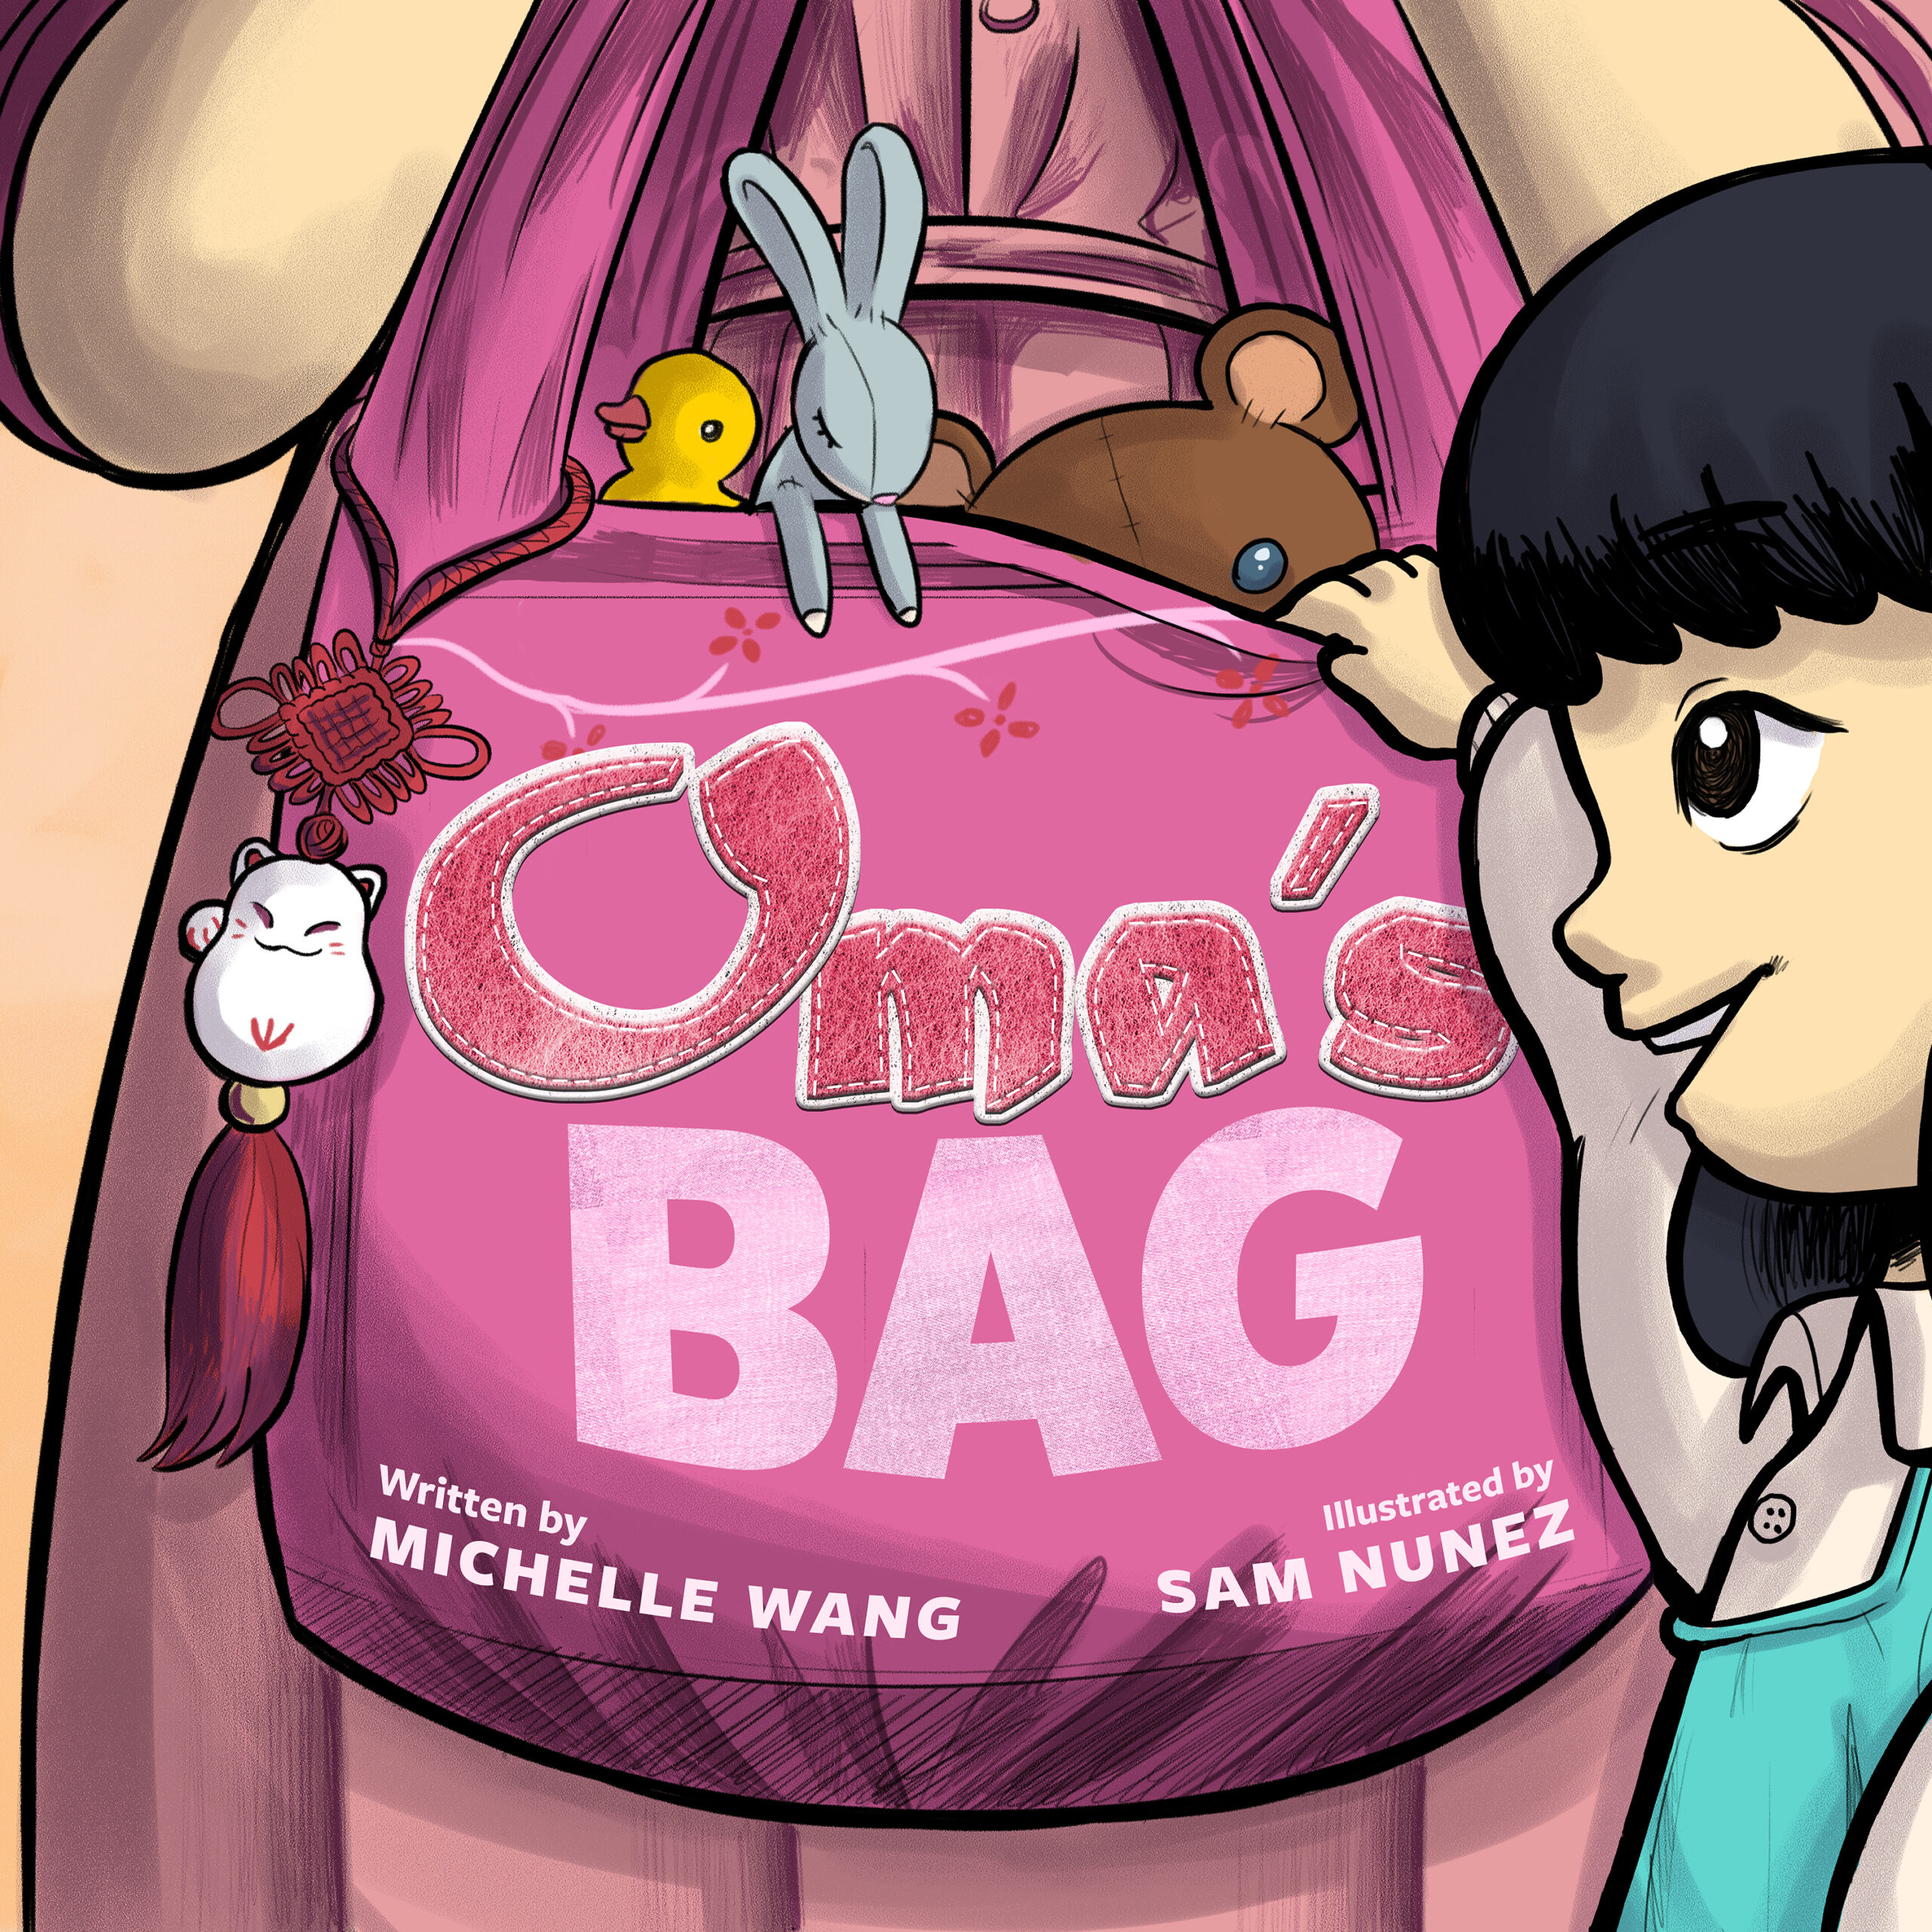 A book cover with an illustration of a child rummaging through a pink bag that holds stuffed animals.